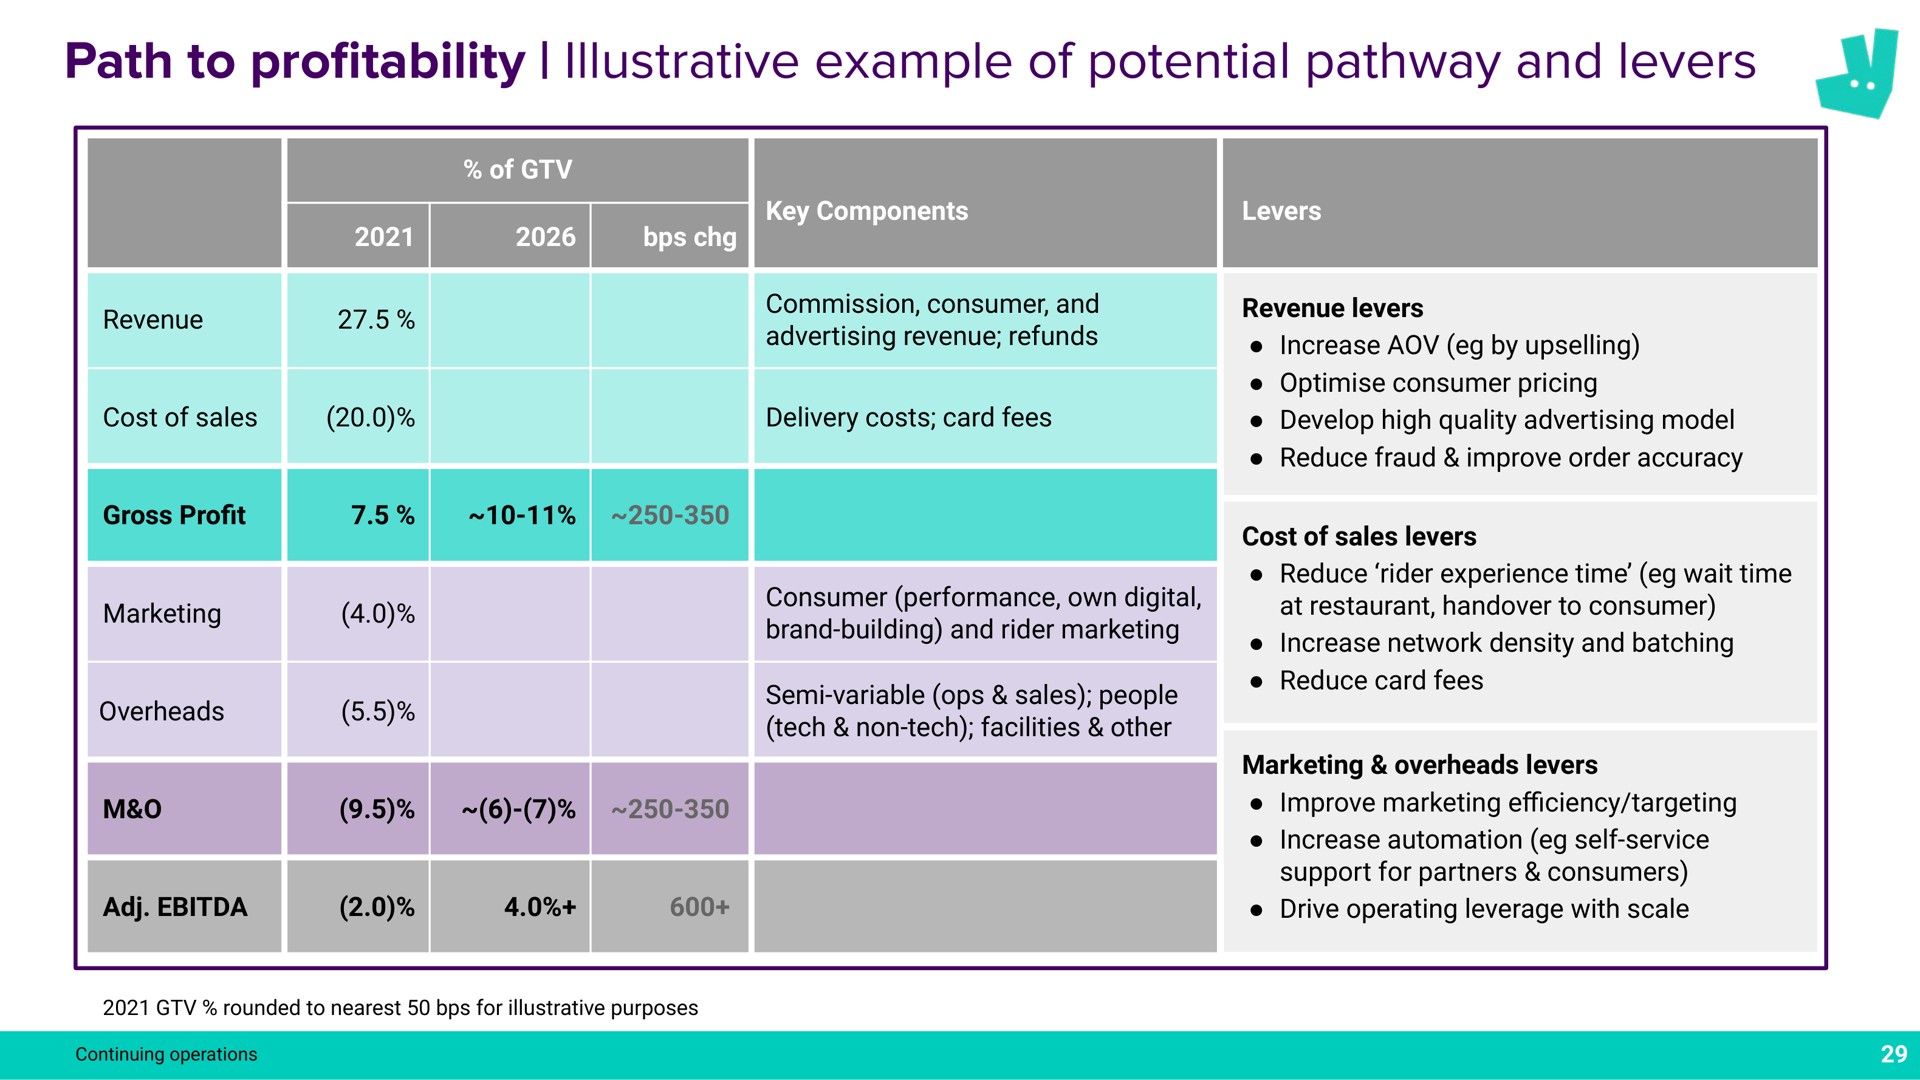 path to pro illustrative example of potential pathway and levers profitability a | Deliveroo